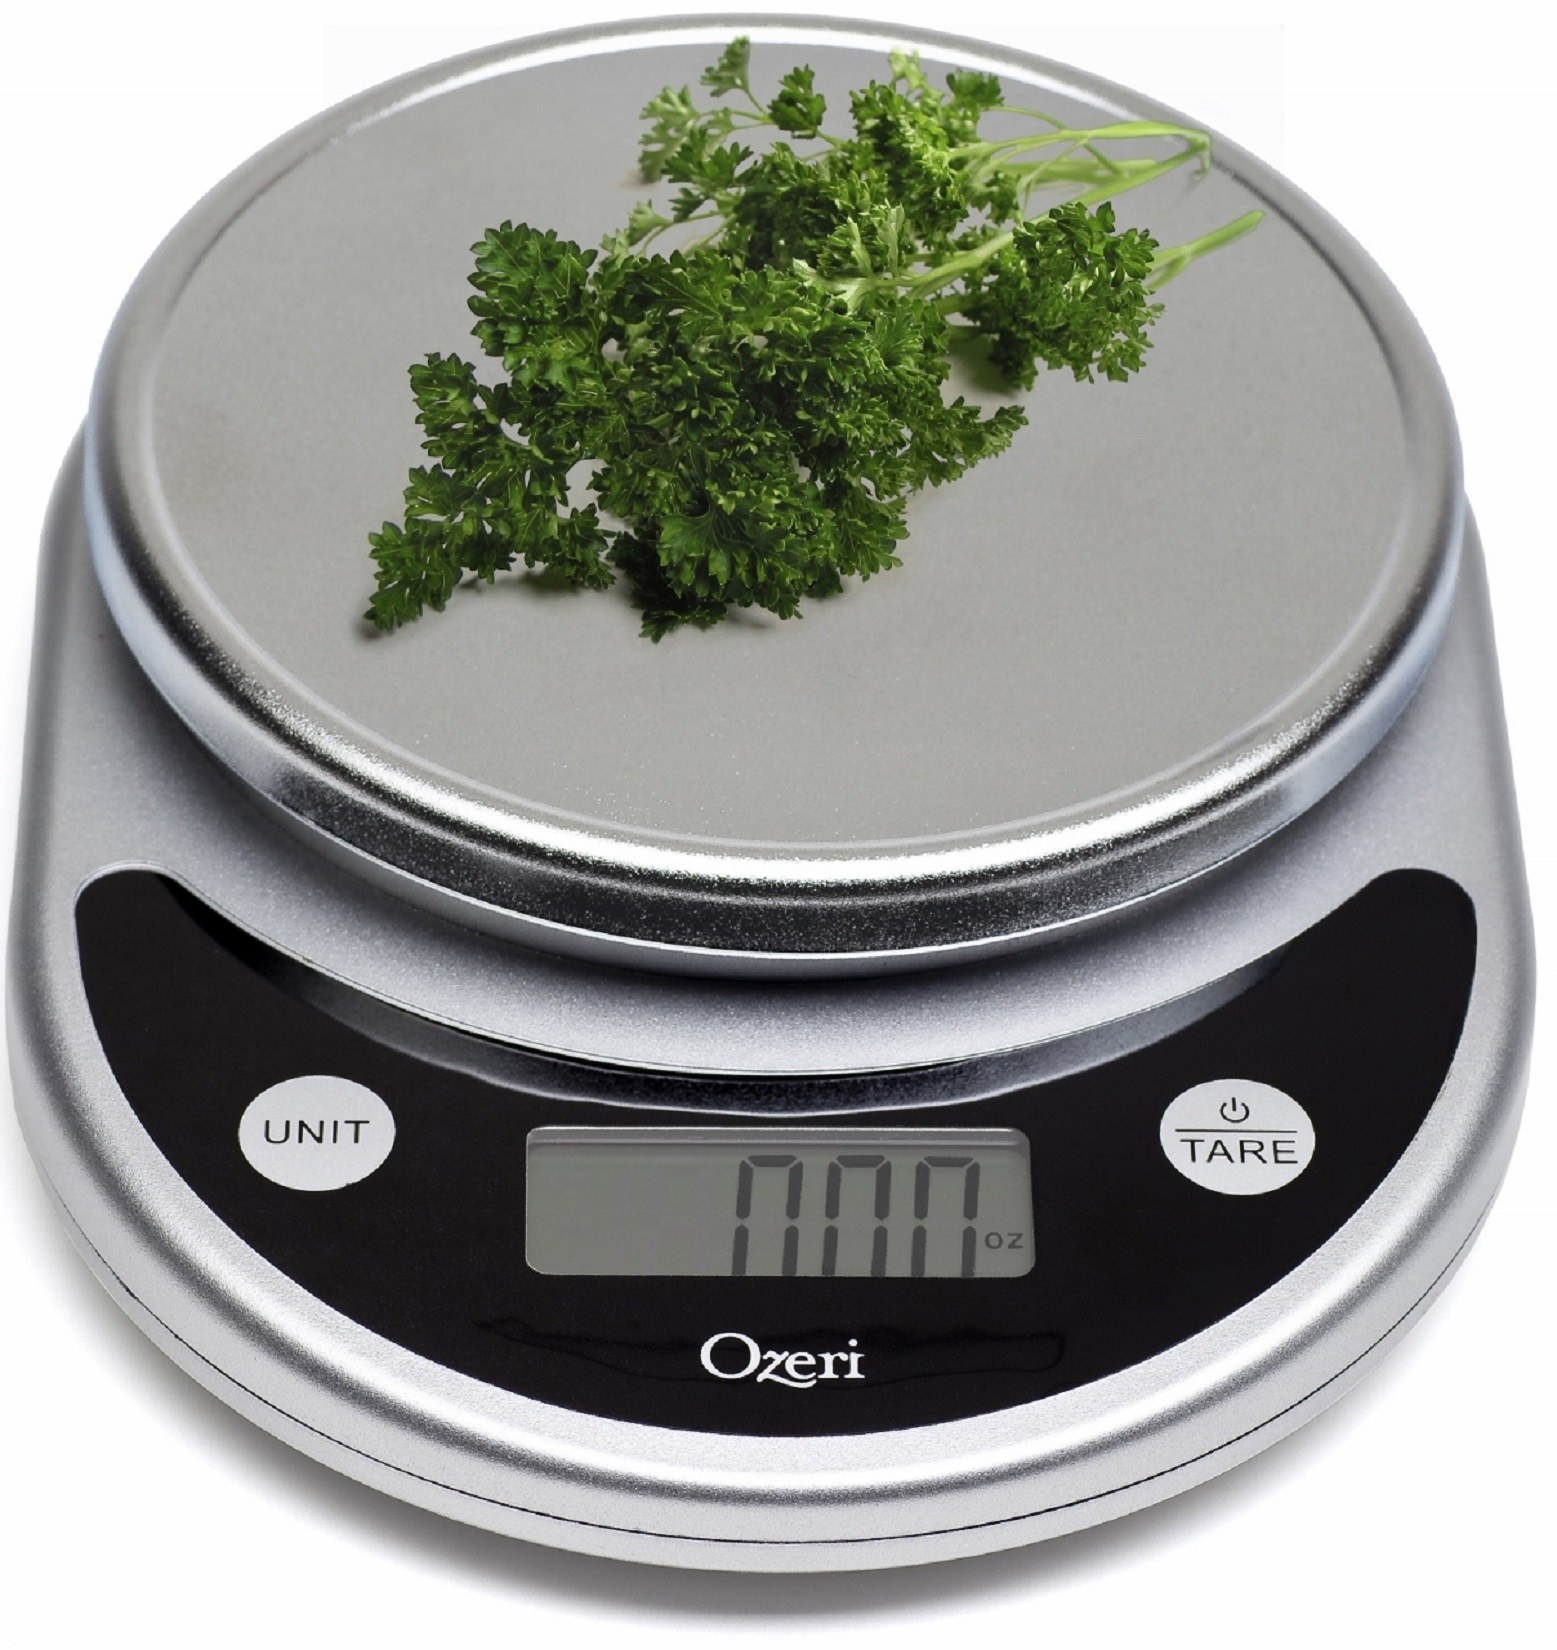 The black on silver digital multifunction food scale